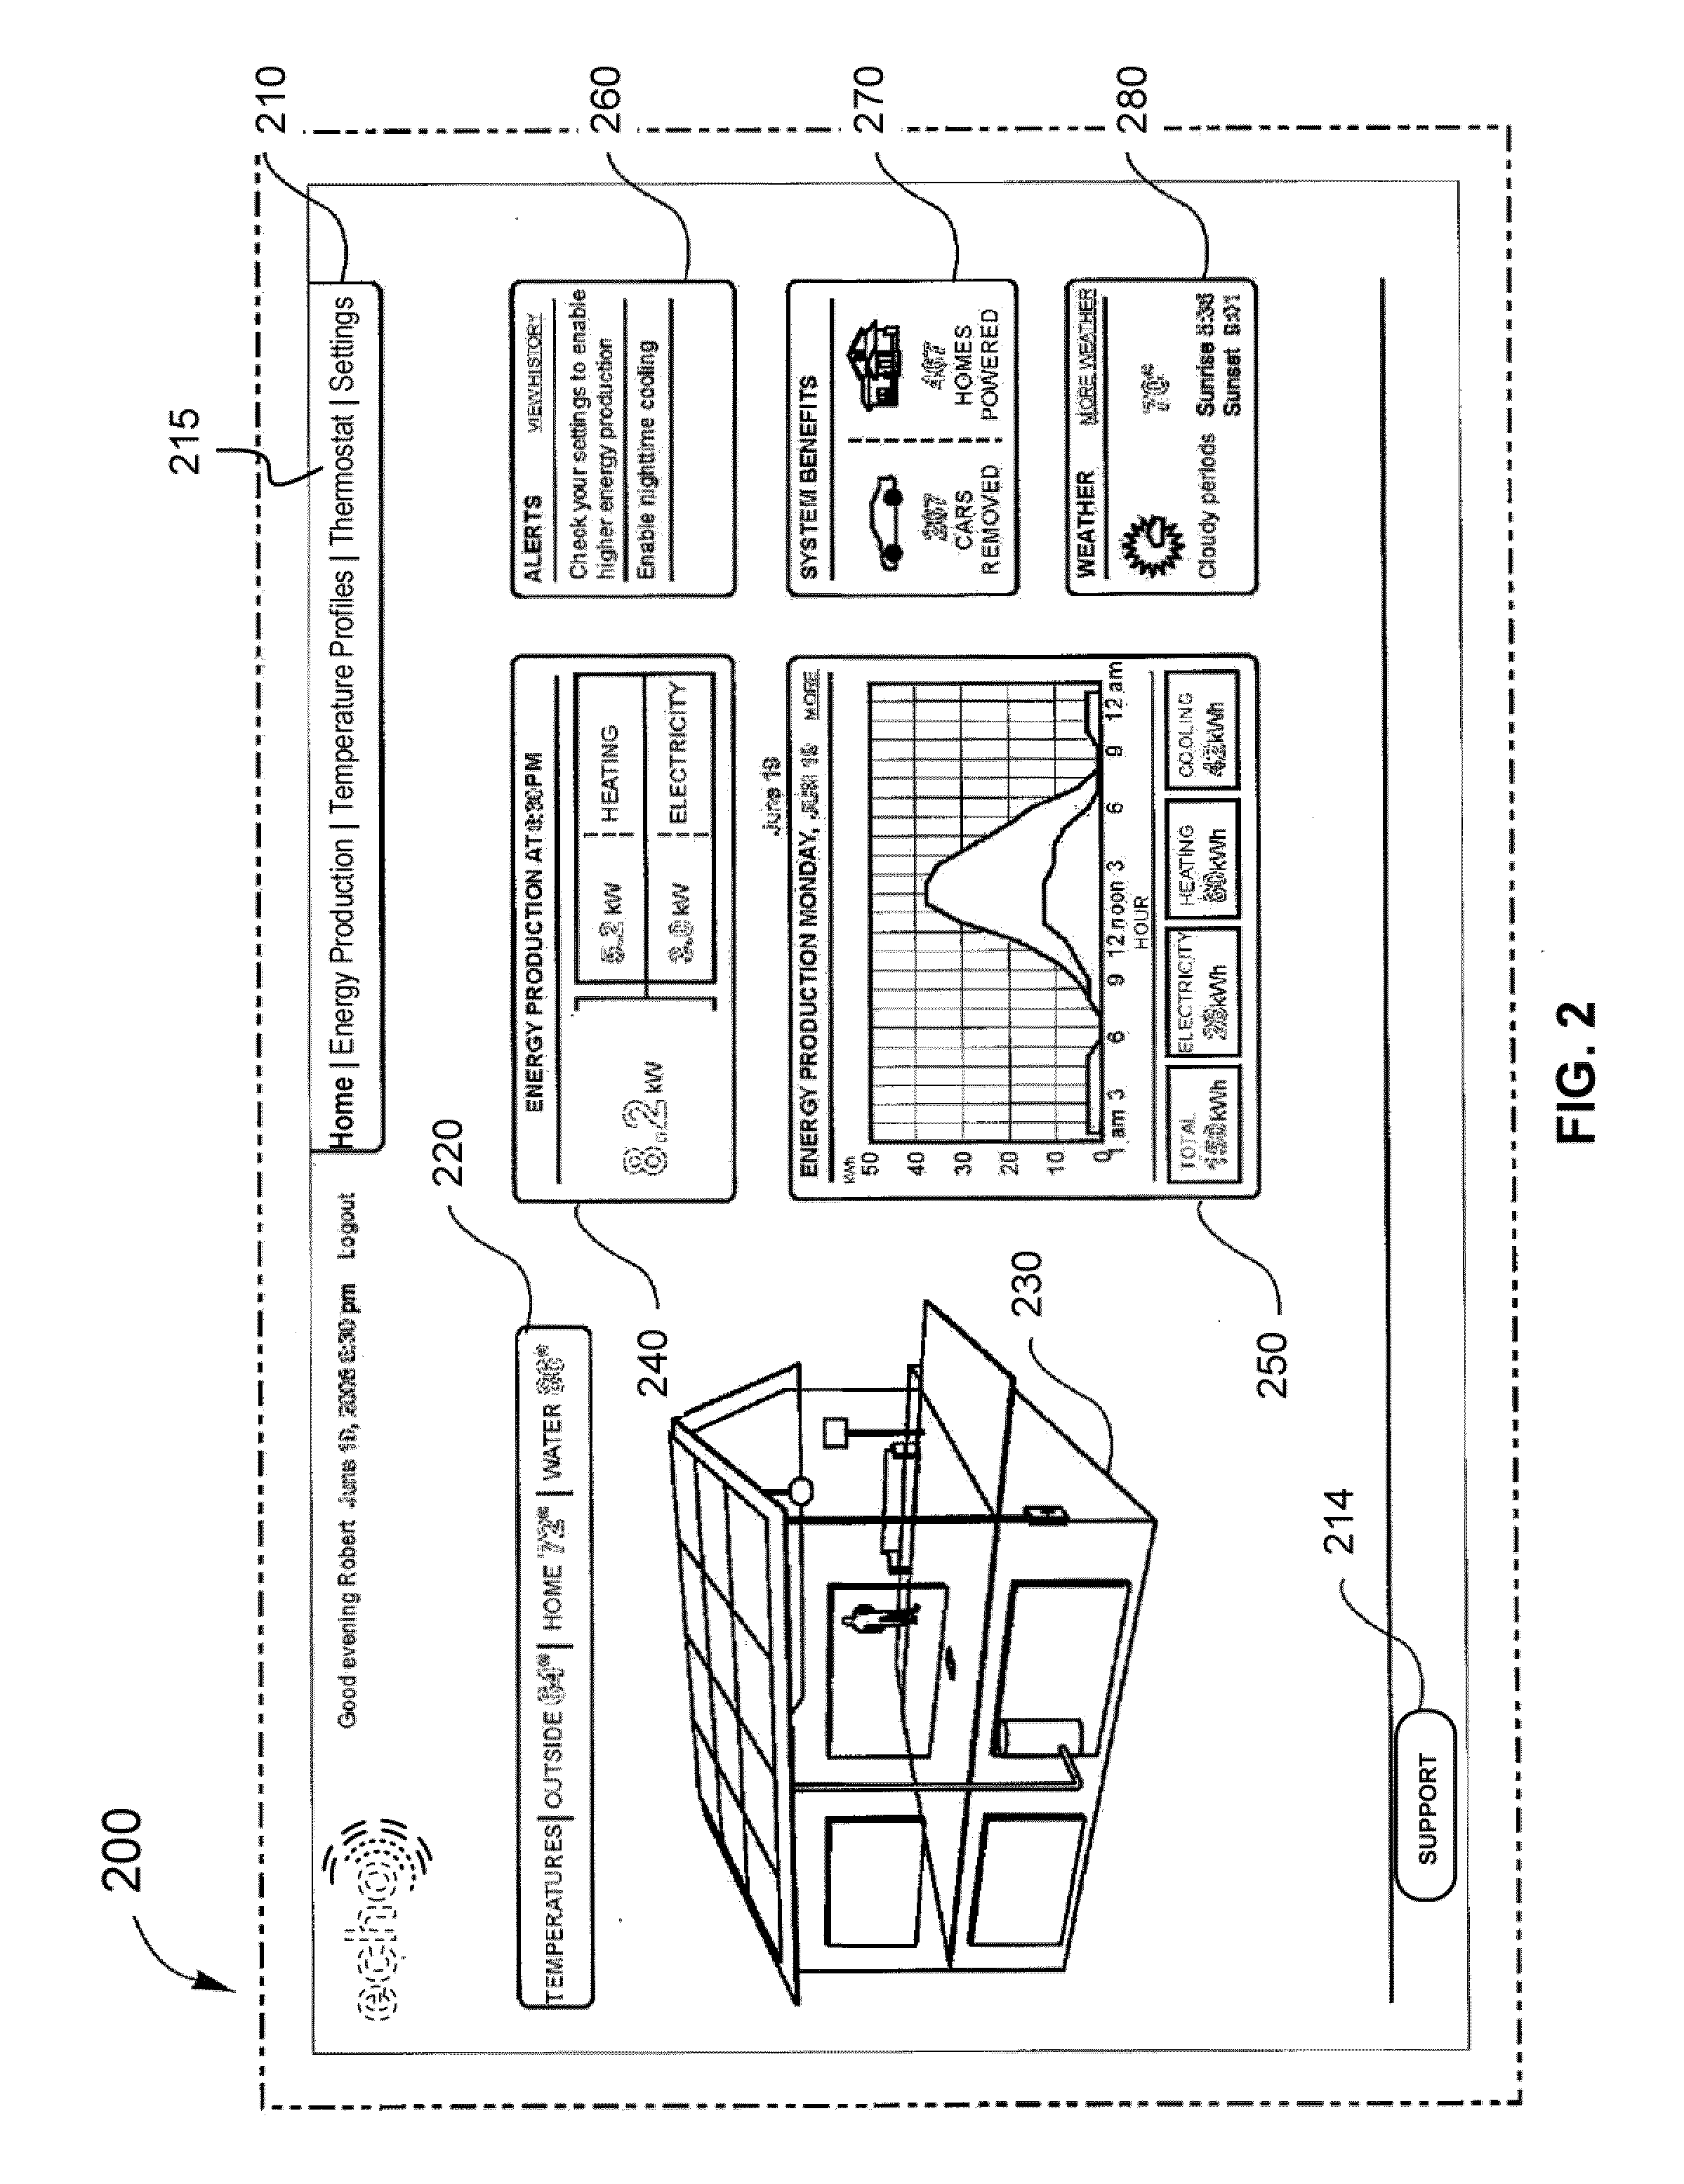 Thermostat method and system for controlling solar energy utilization for efficient energy usage and conservation of energy resources